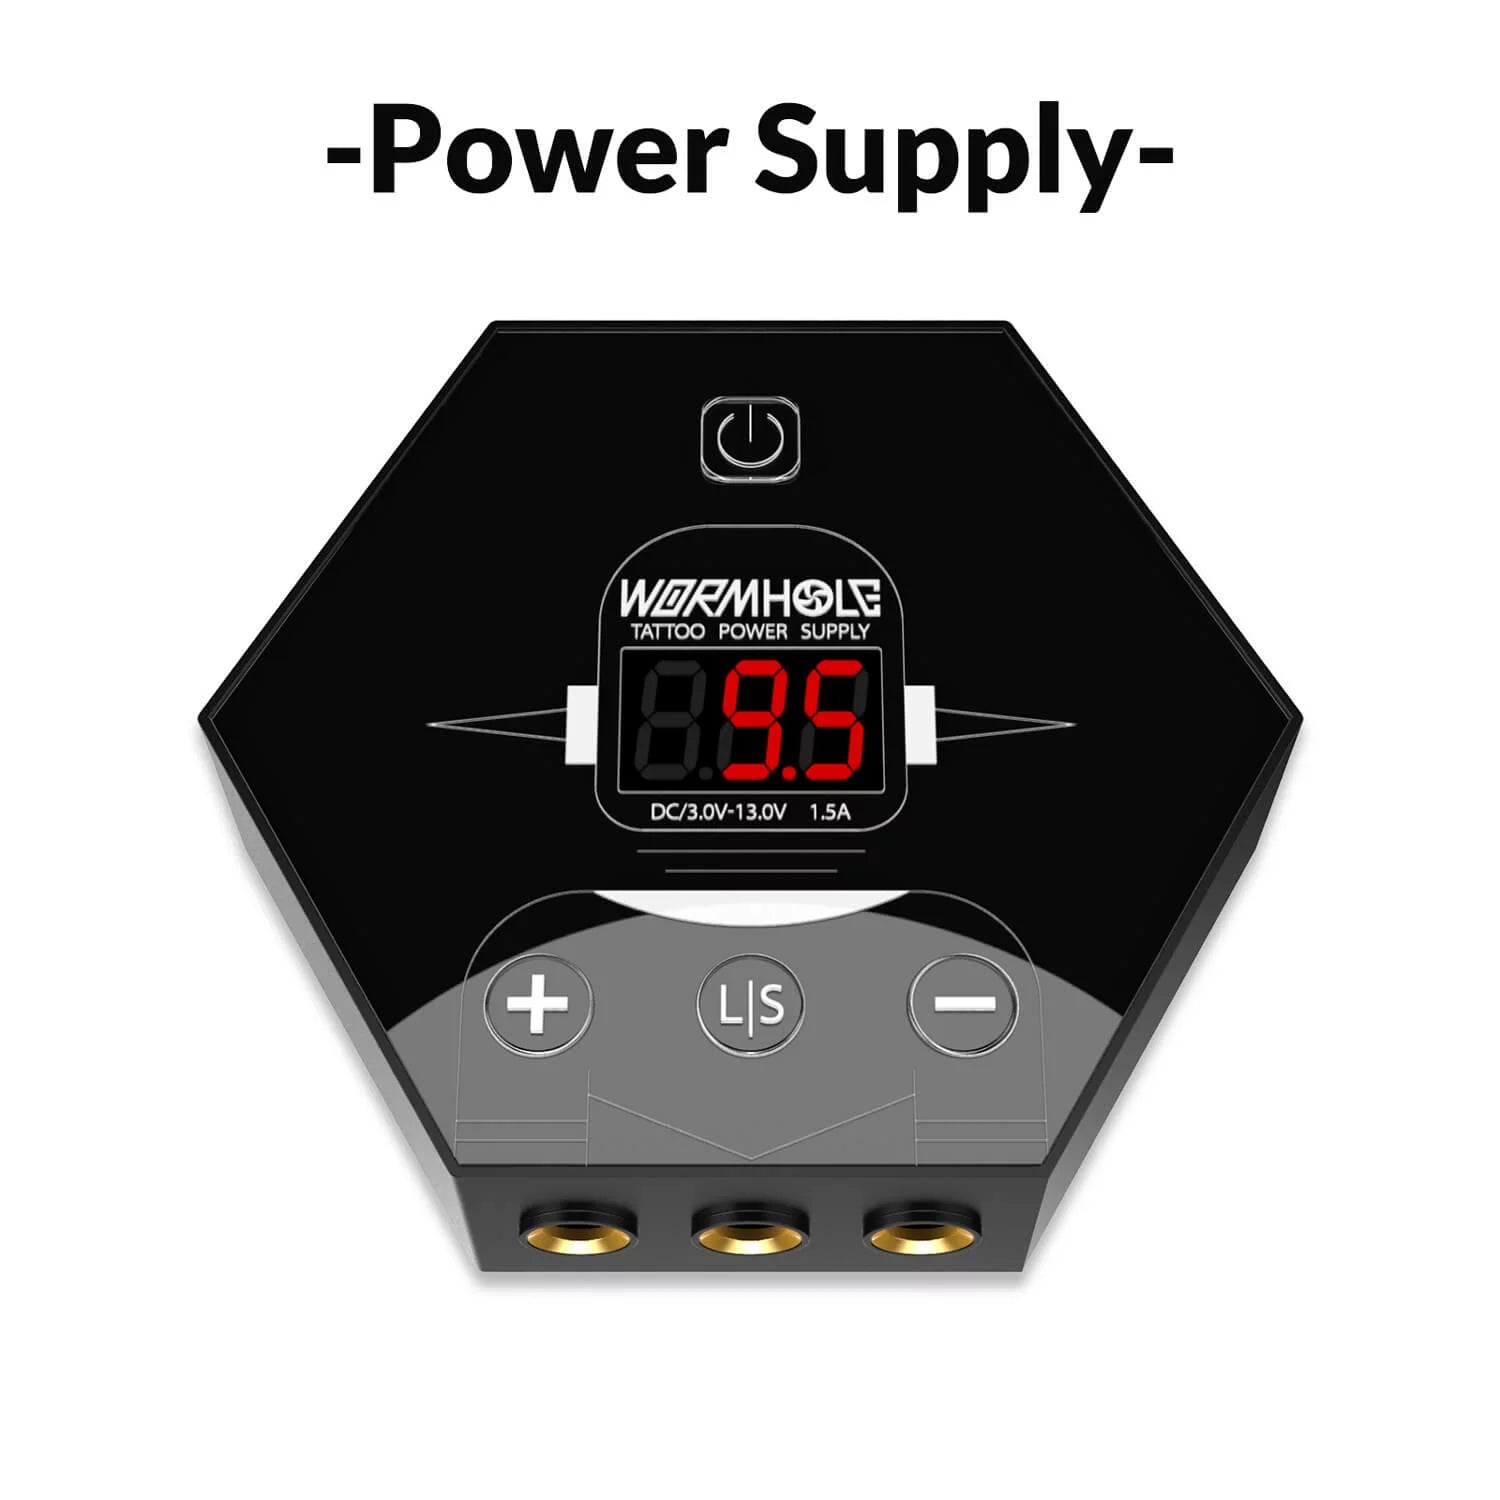 Graphite Battery Chargeable Tattoo Power Supply